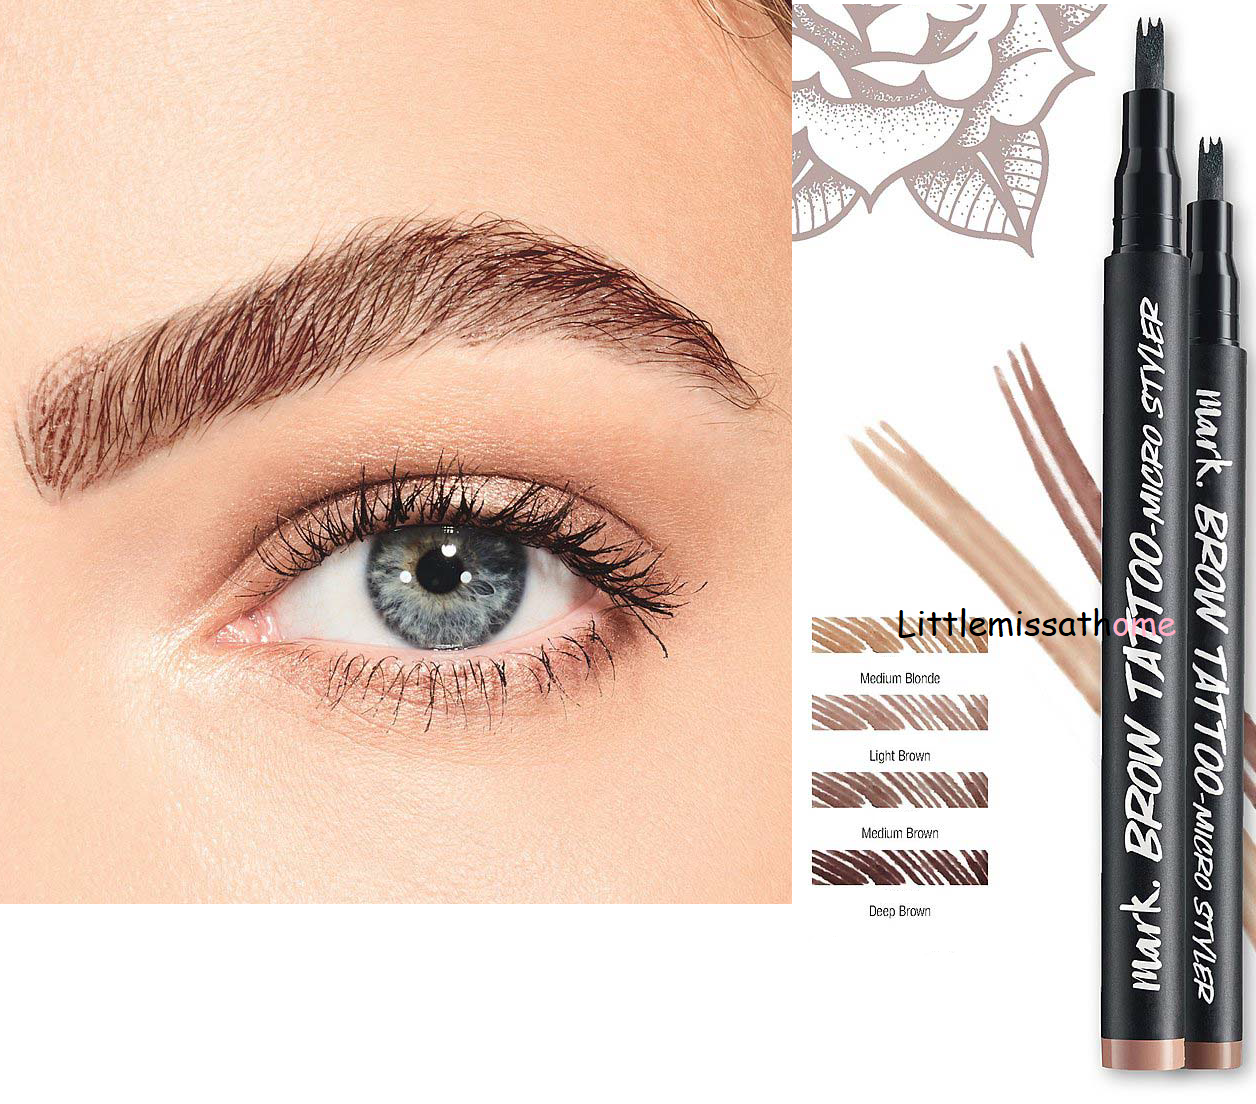 curtain frontier excitement eyebrow brush that